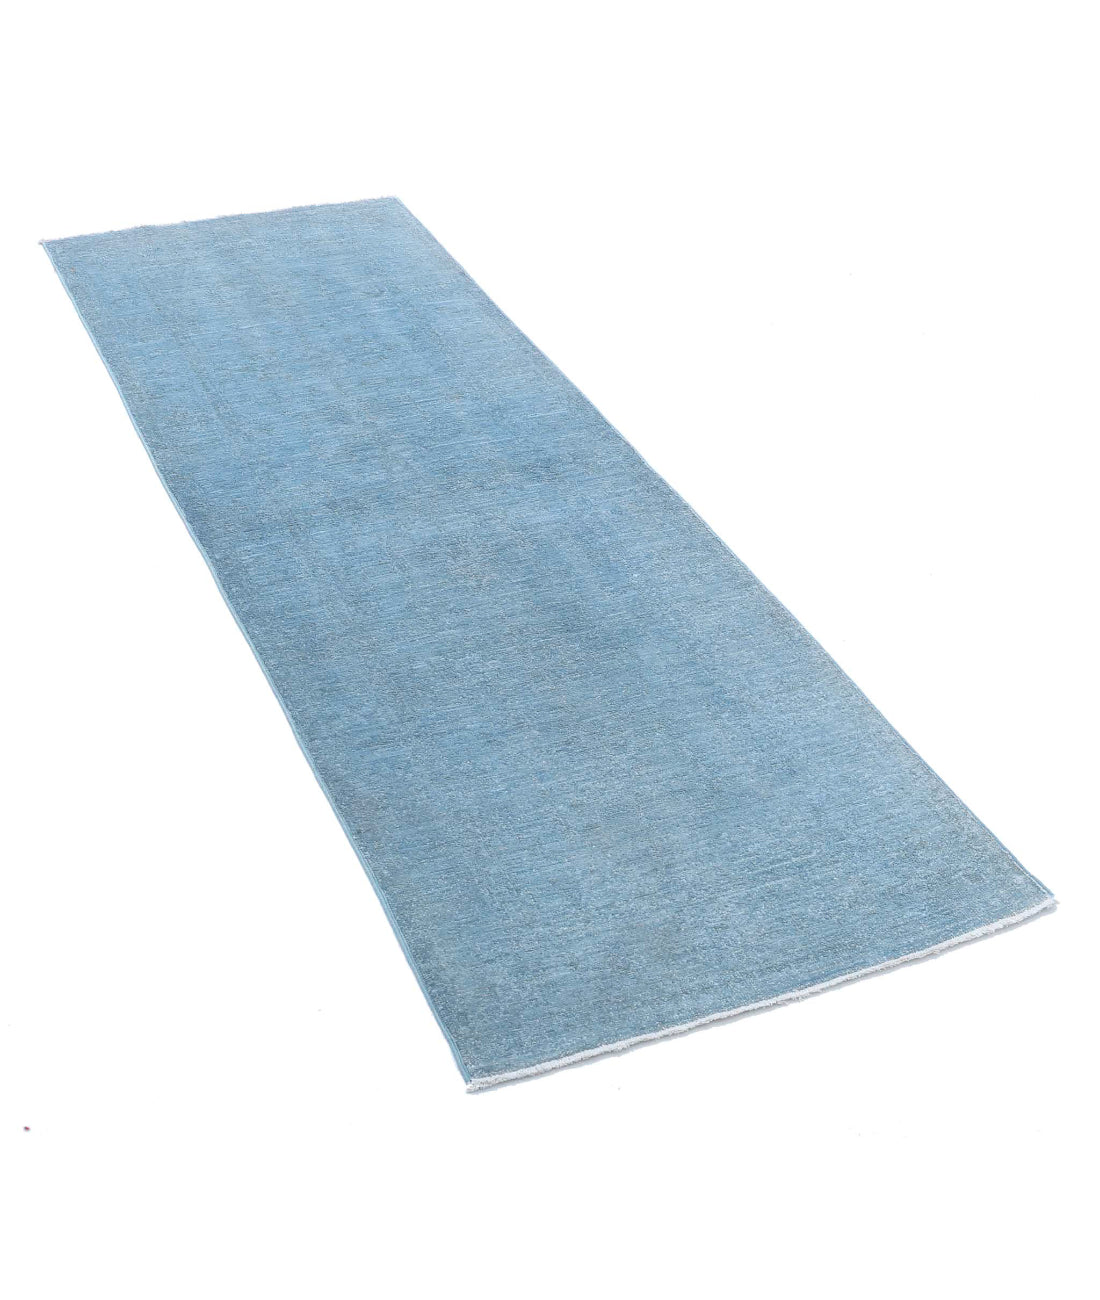 Overdye 2'4'' X 6'9'' Hand-Knotted Wool Rug 2'4'' x 6'9'' (70 X 203) / Teal / Teal